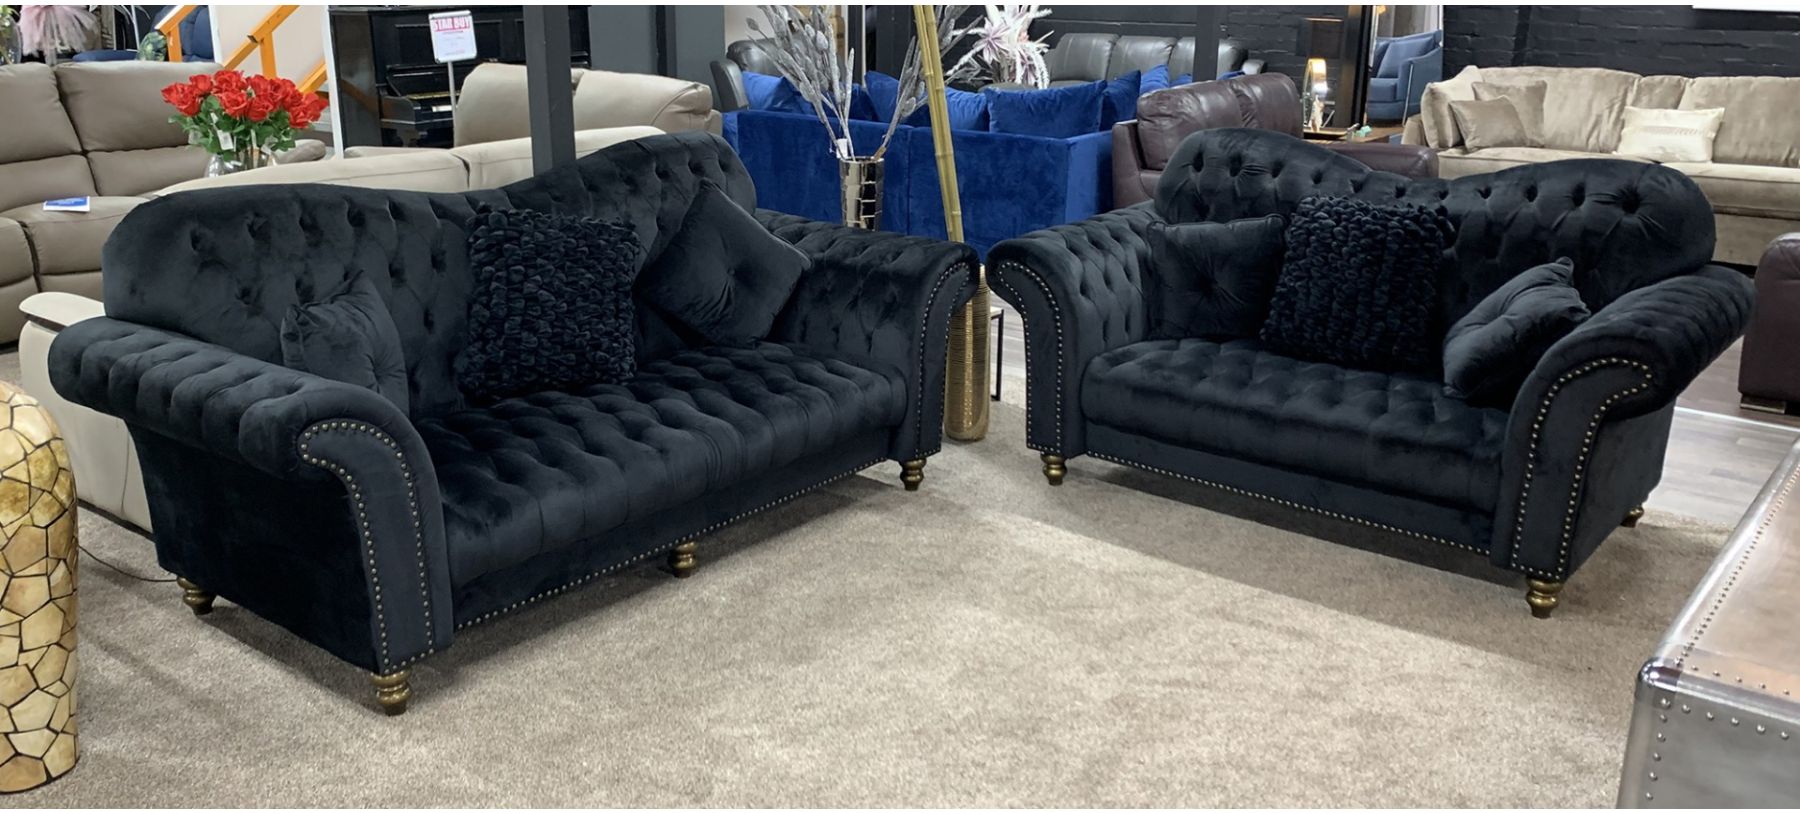 Sofa Set Studded Round Arms, Studded Leather Couch